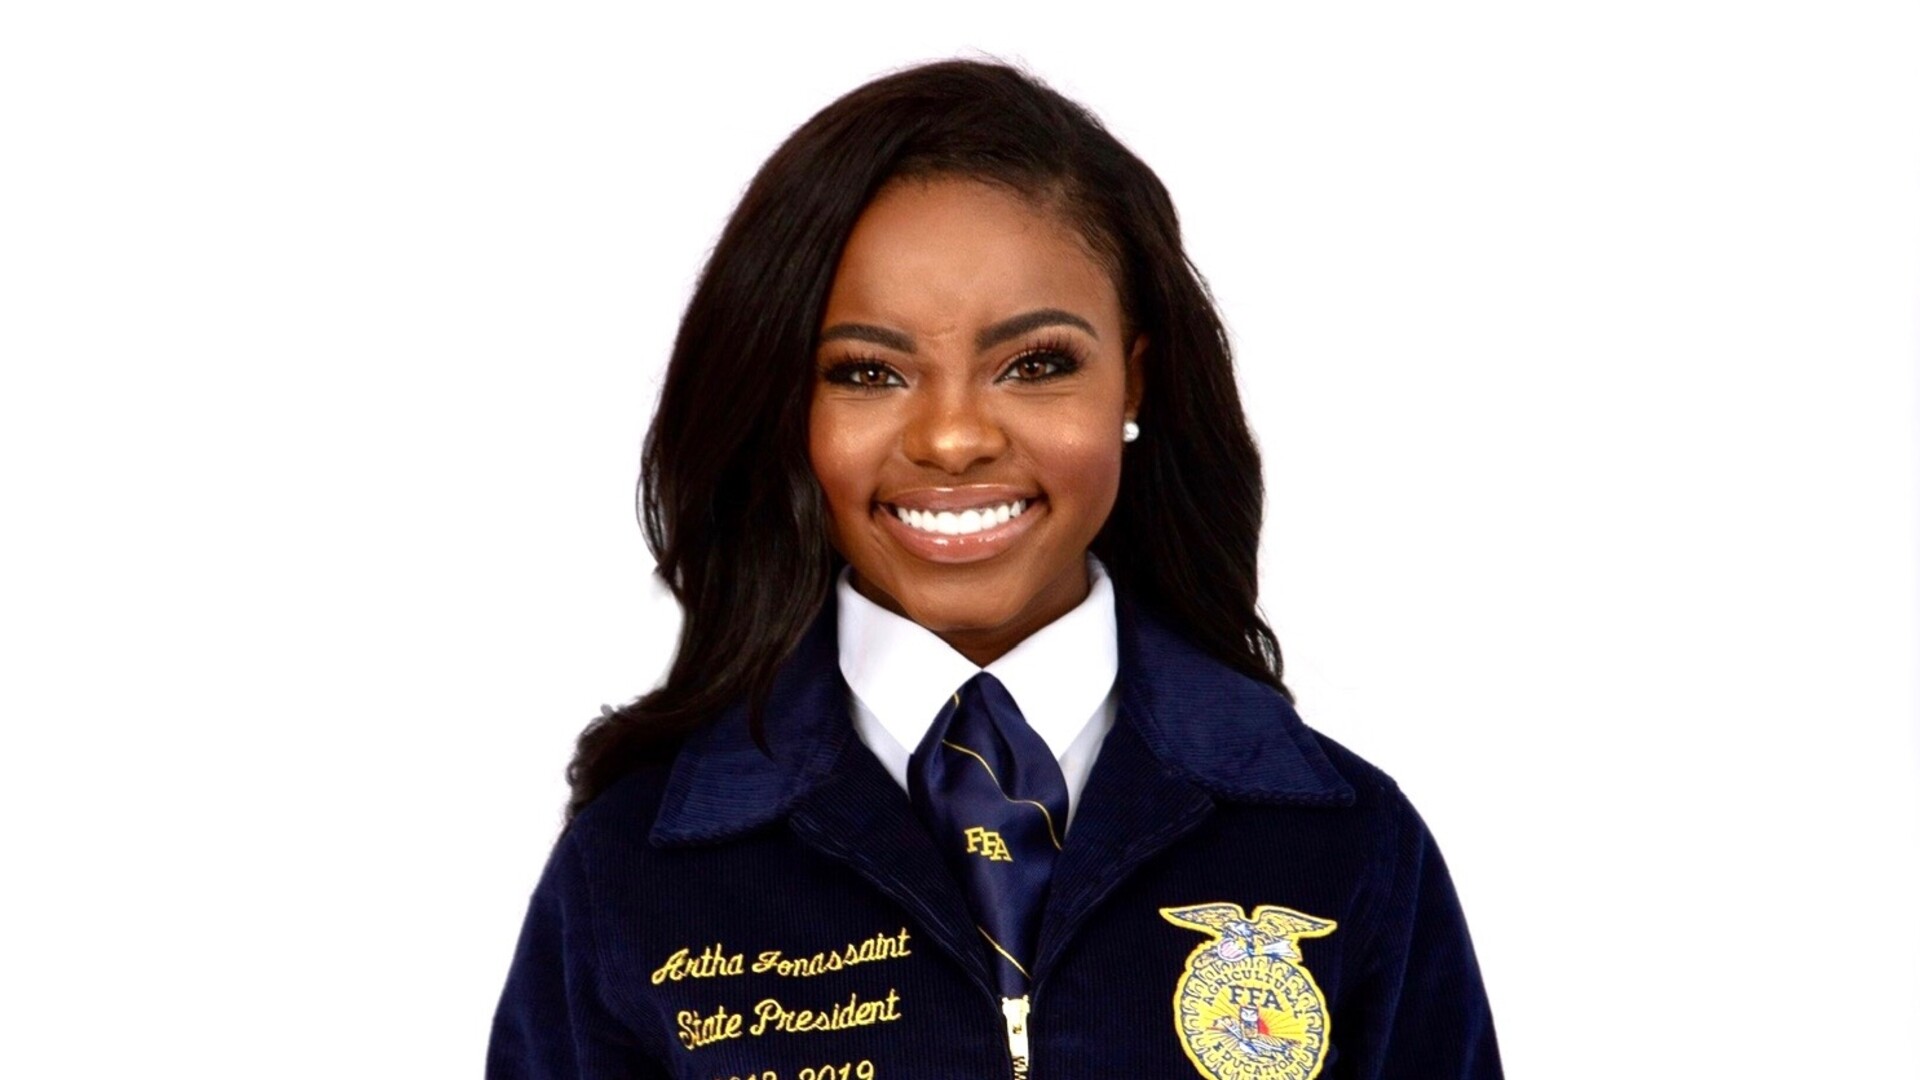 National FFA Officer Hopes to Inspire Others